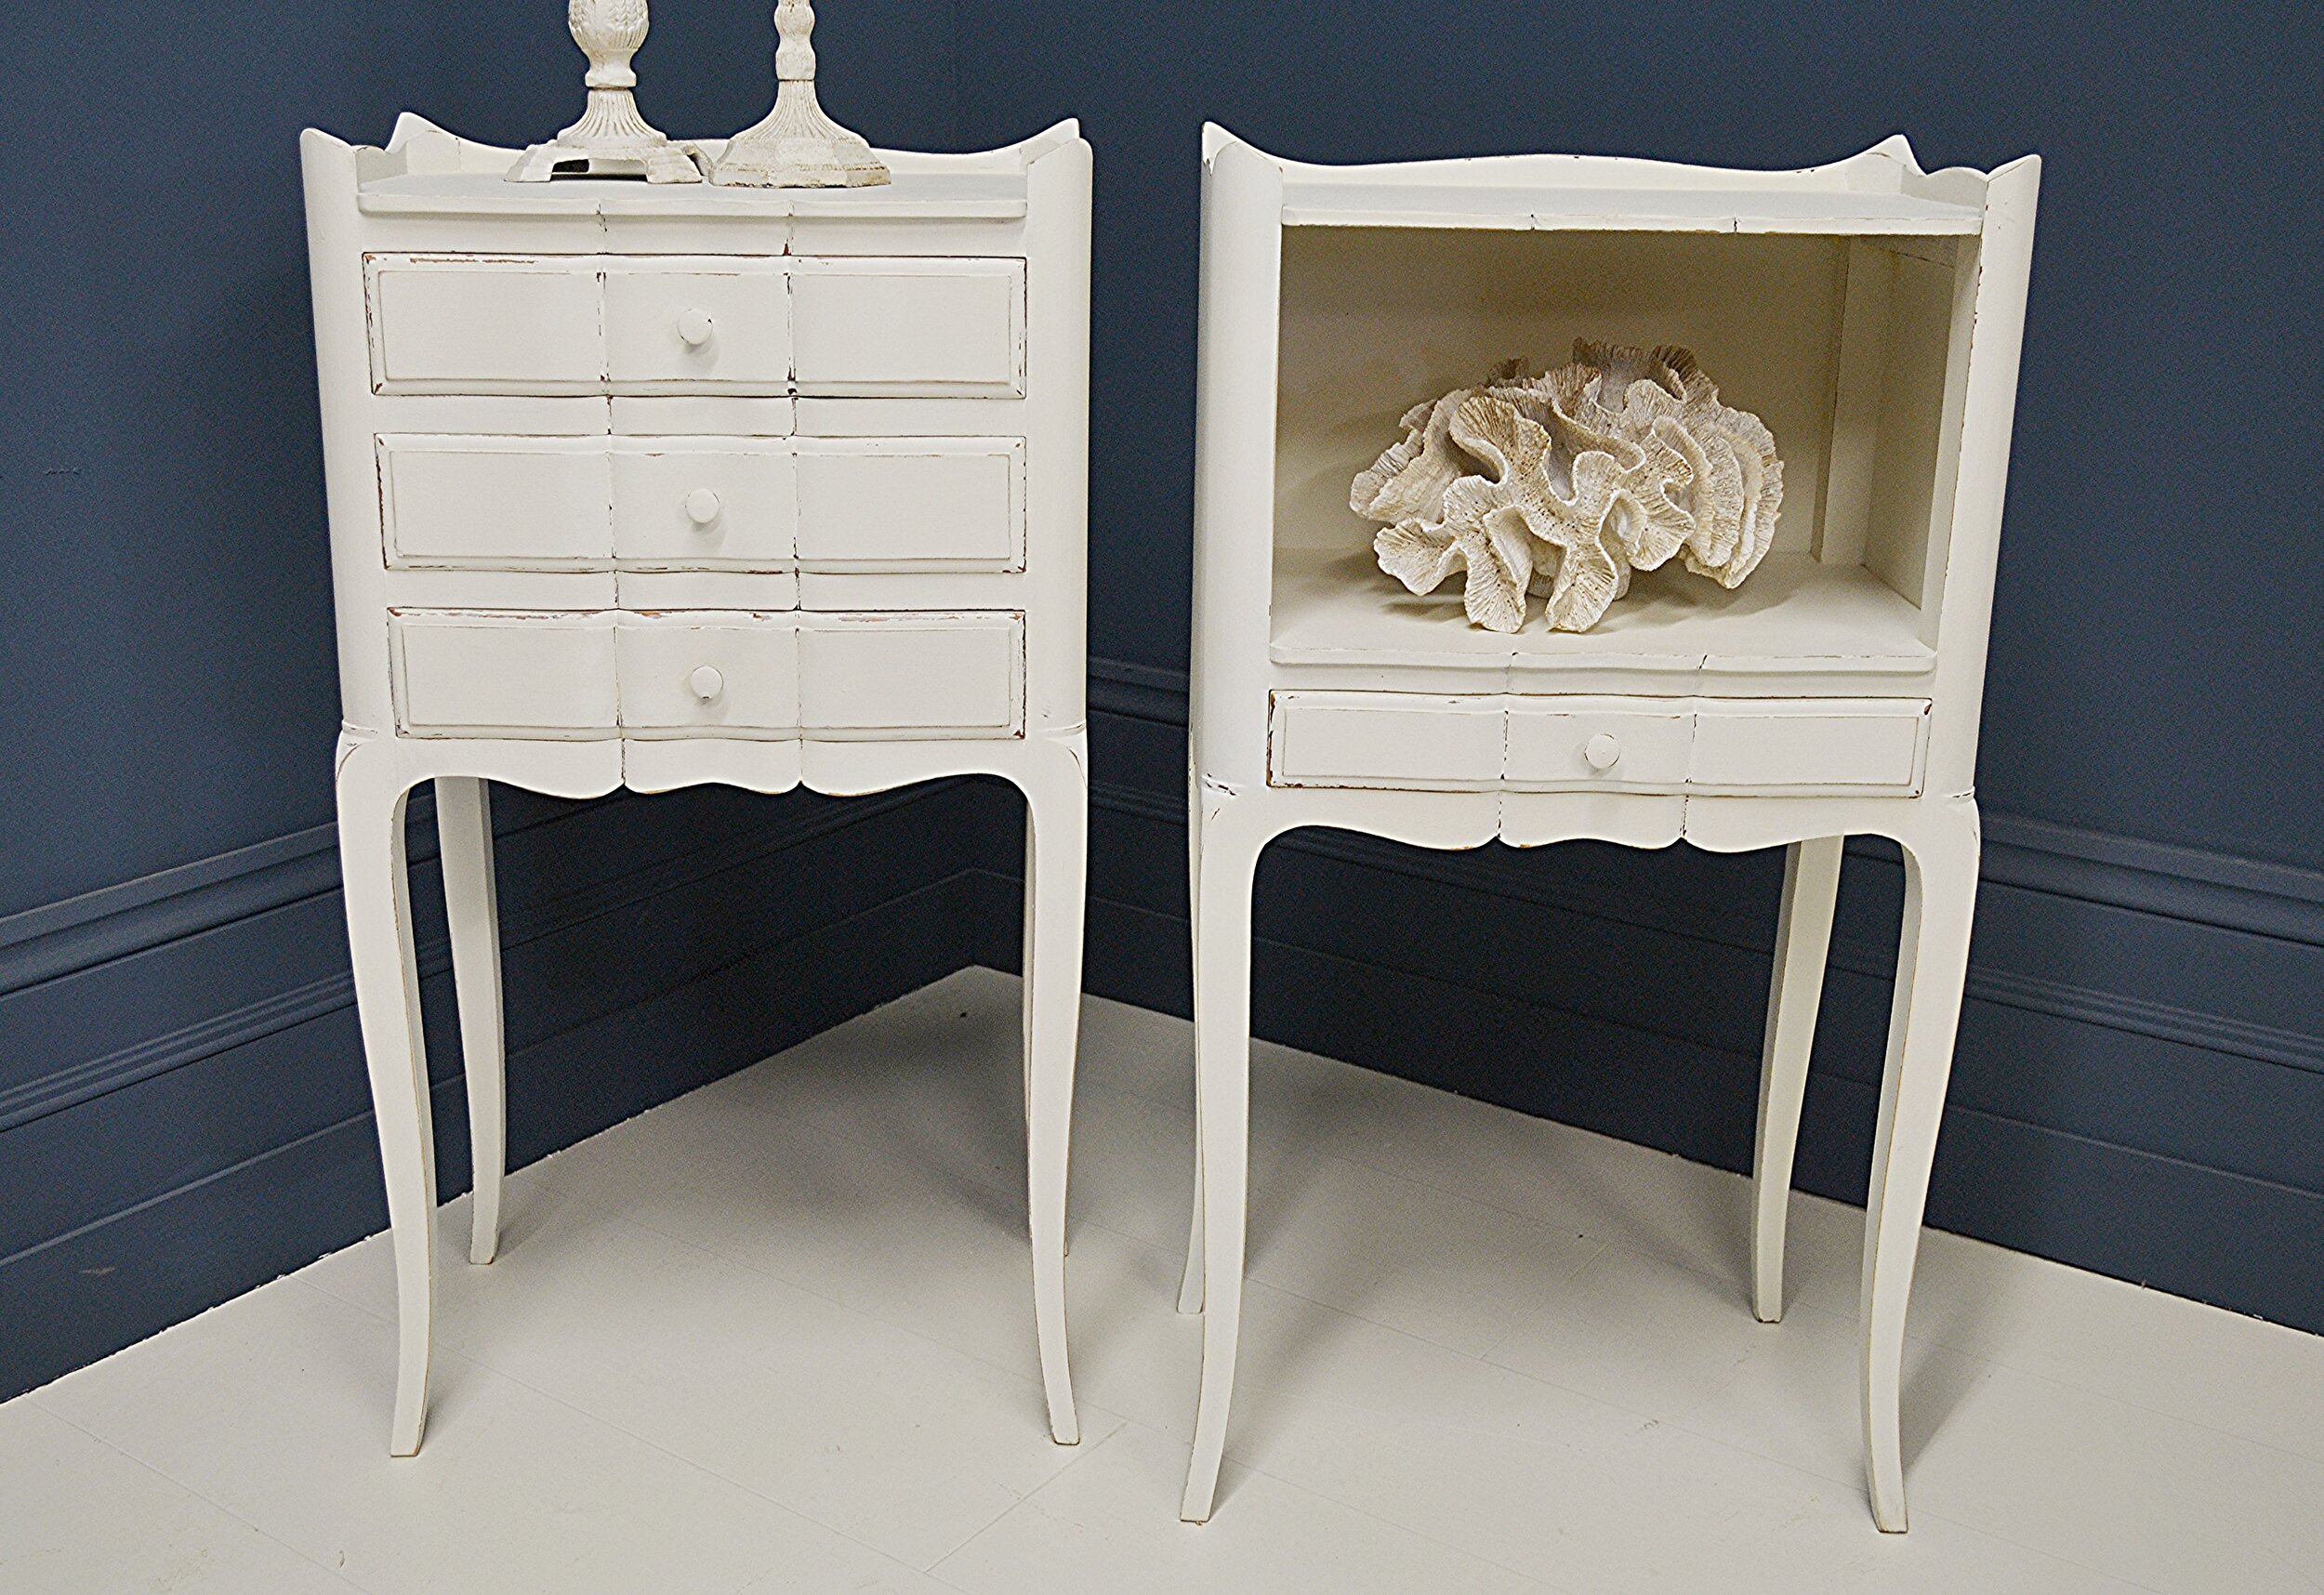 Pair Of Shabby Chic Vintage French Bedside Tables White The Treasure Trove In Sussex Shabby Chic Furniture Vintage Furniture